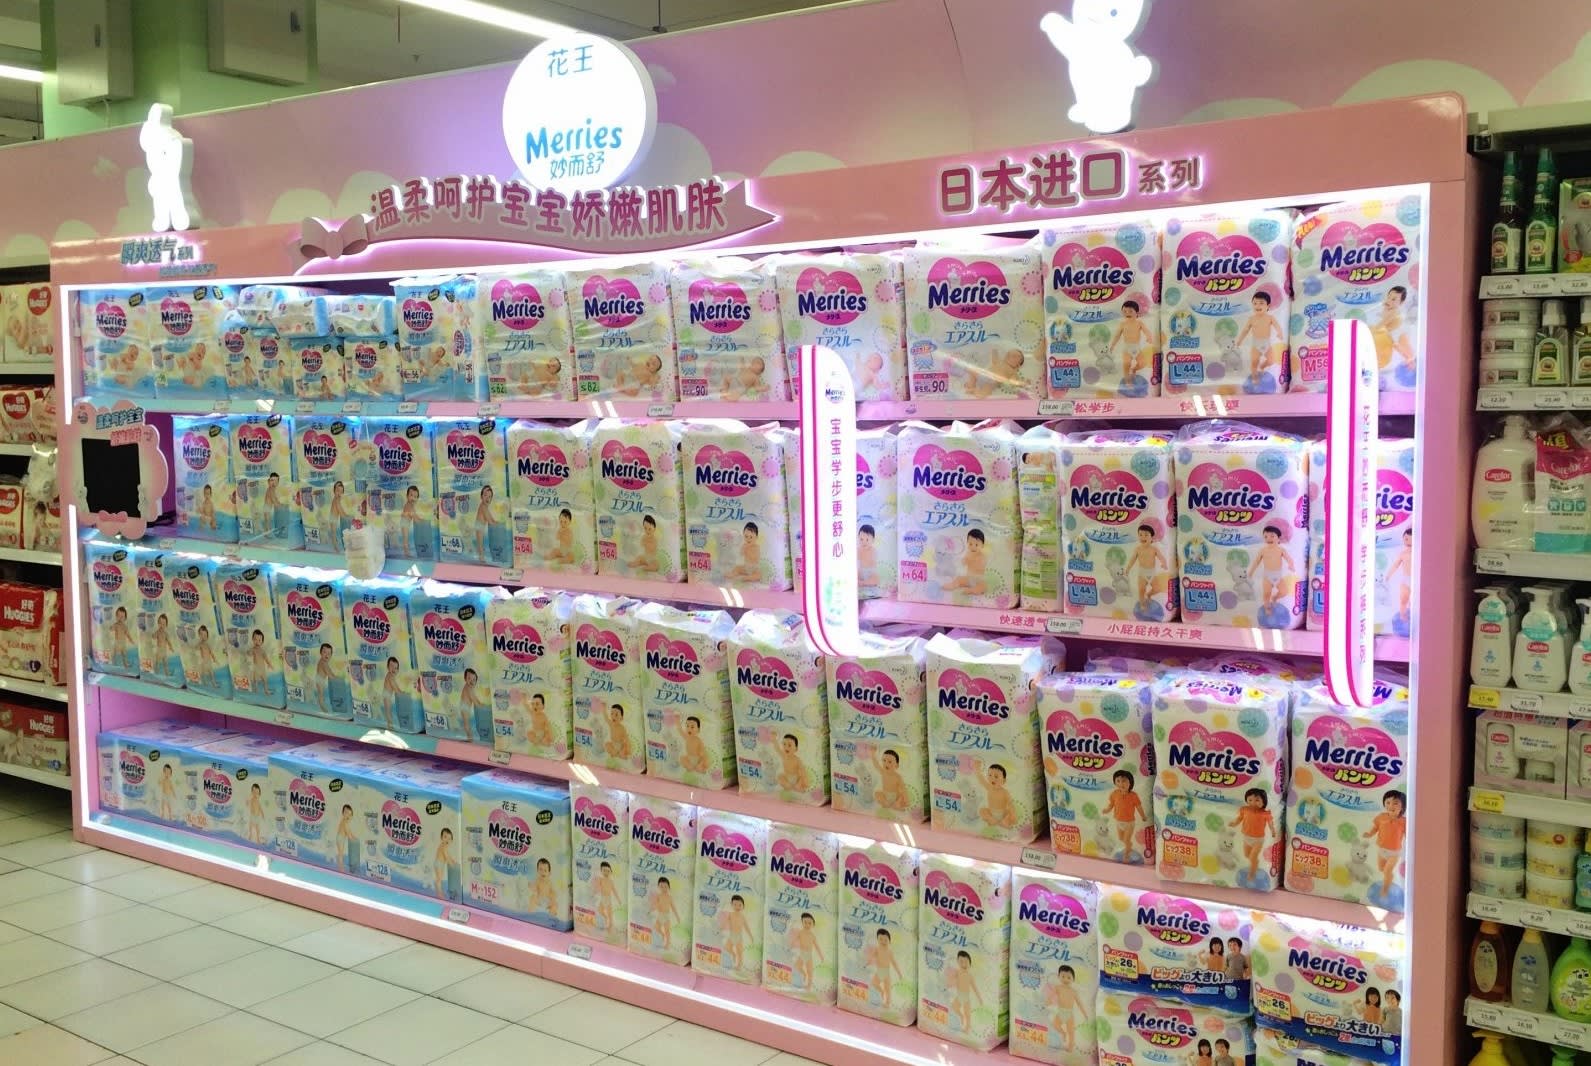 China market research: The expansion of the Chinese diaper market  |  daxue consulting